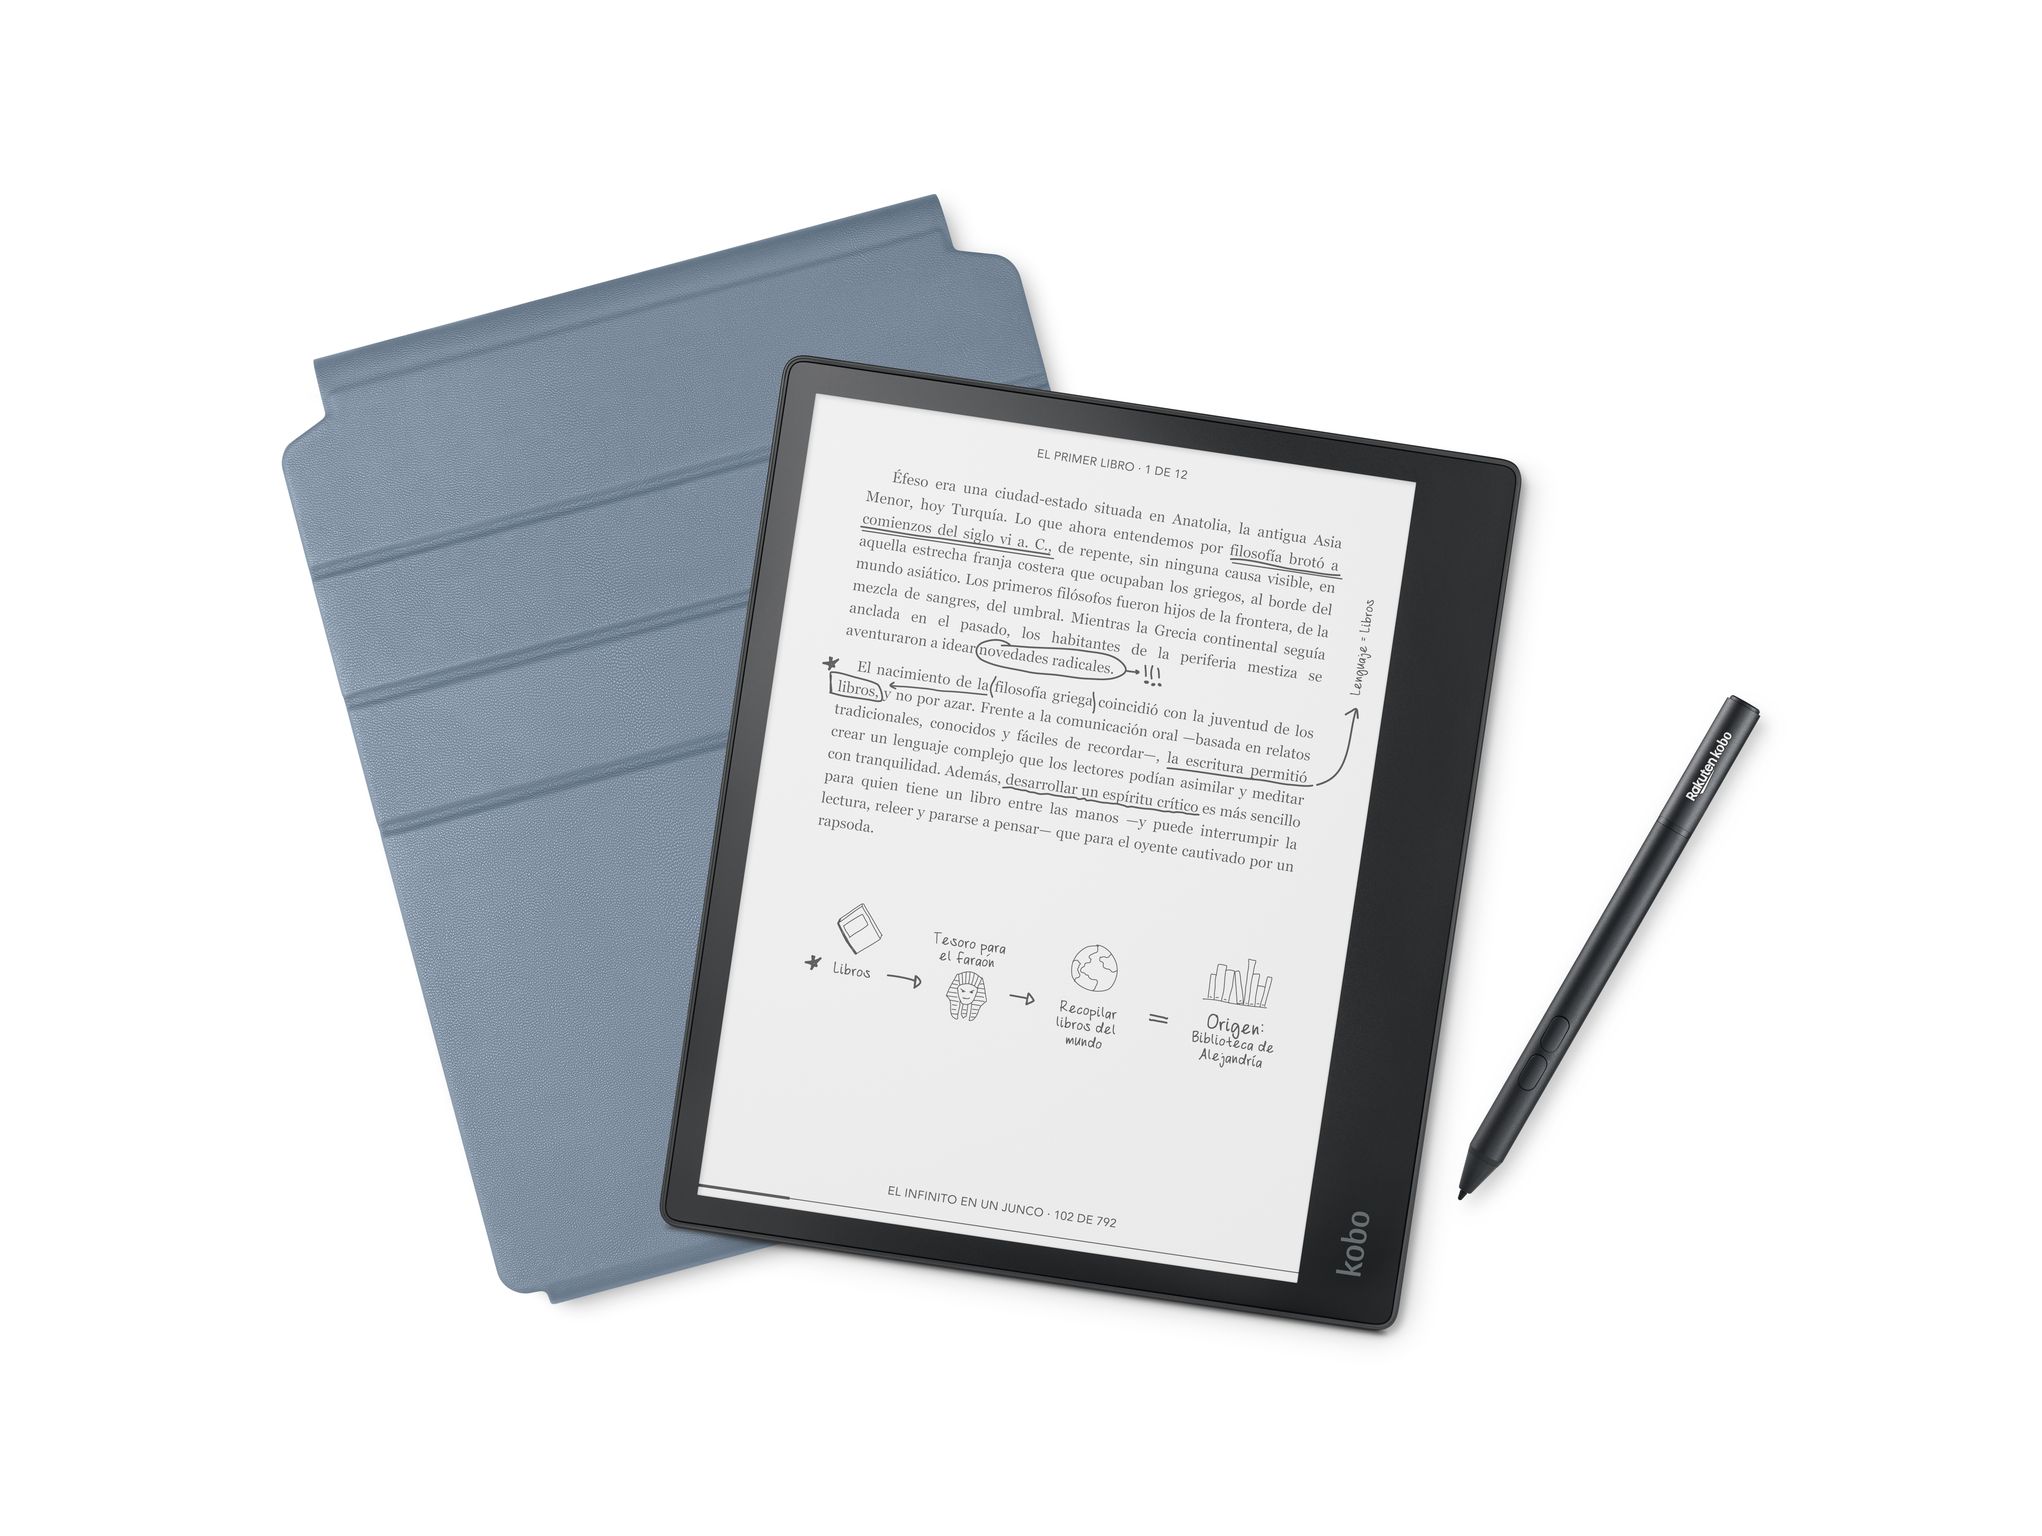 The Kobo Ellipsa is an electronic book reader designed to take notes in both self-books and notebook format